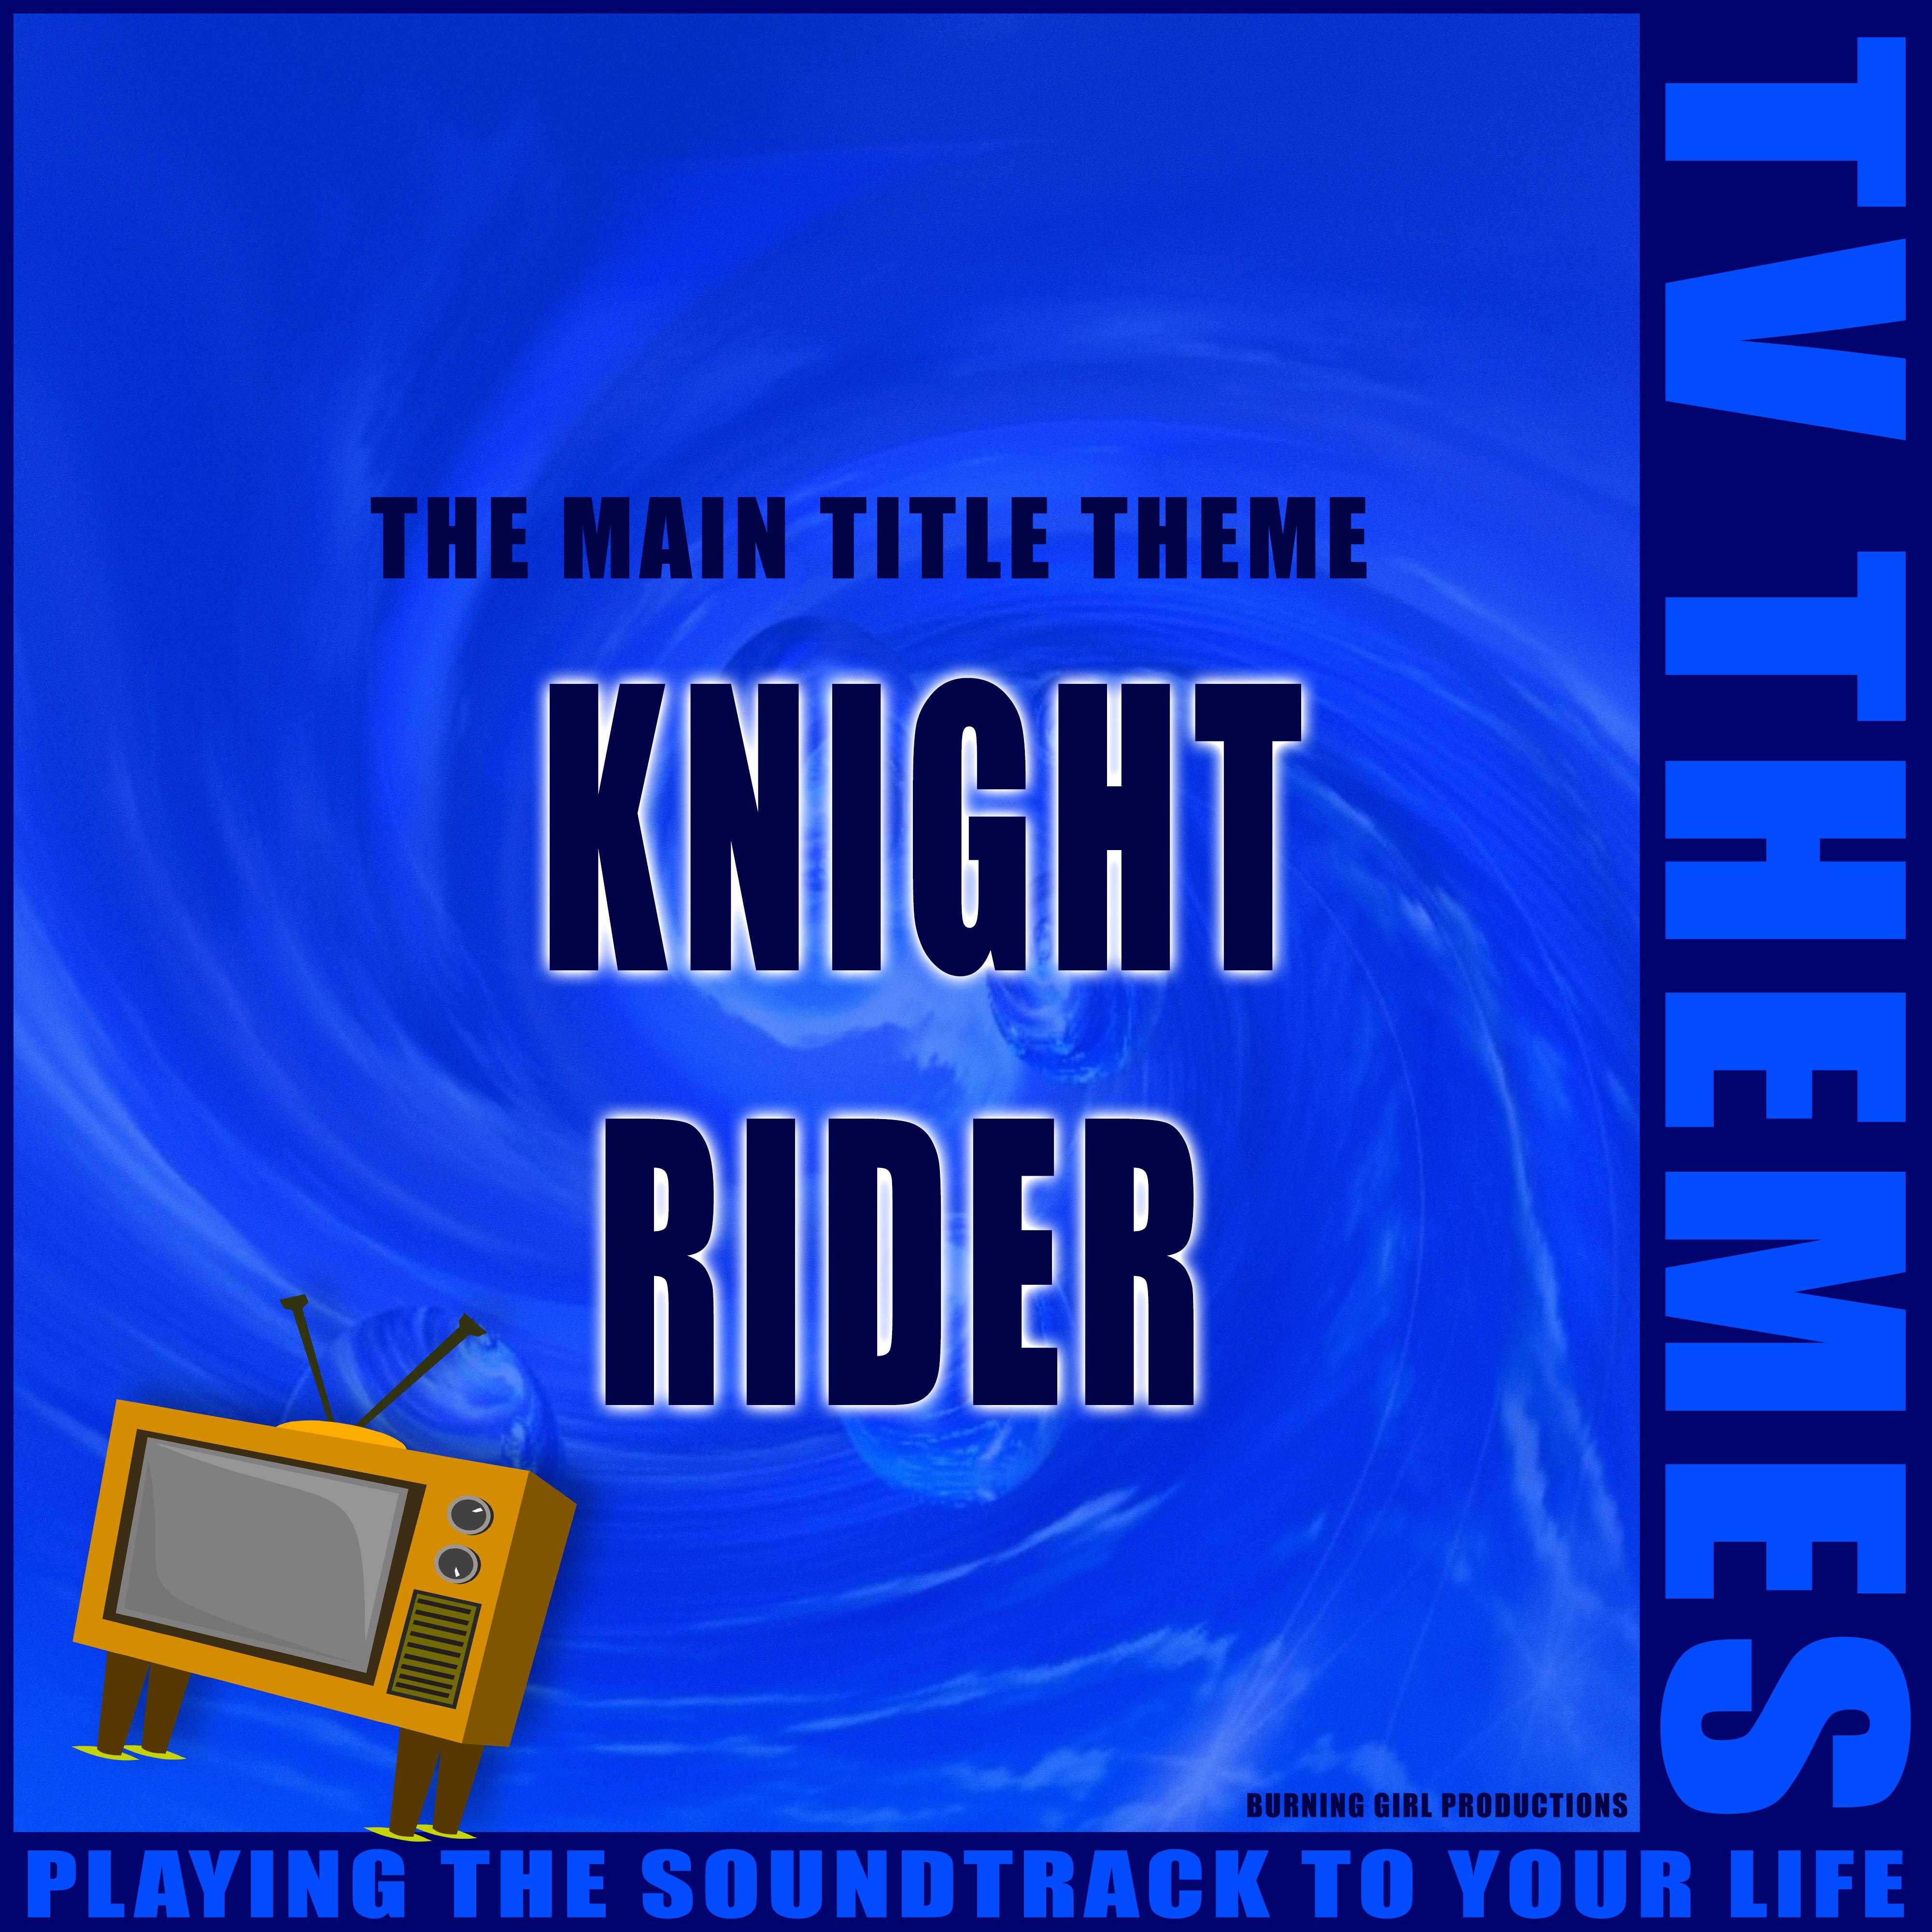 The Main Title Theme - Knight Rider